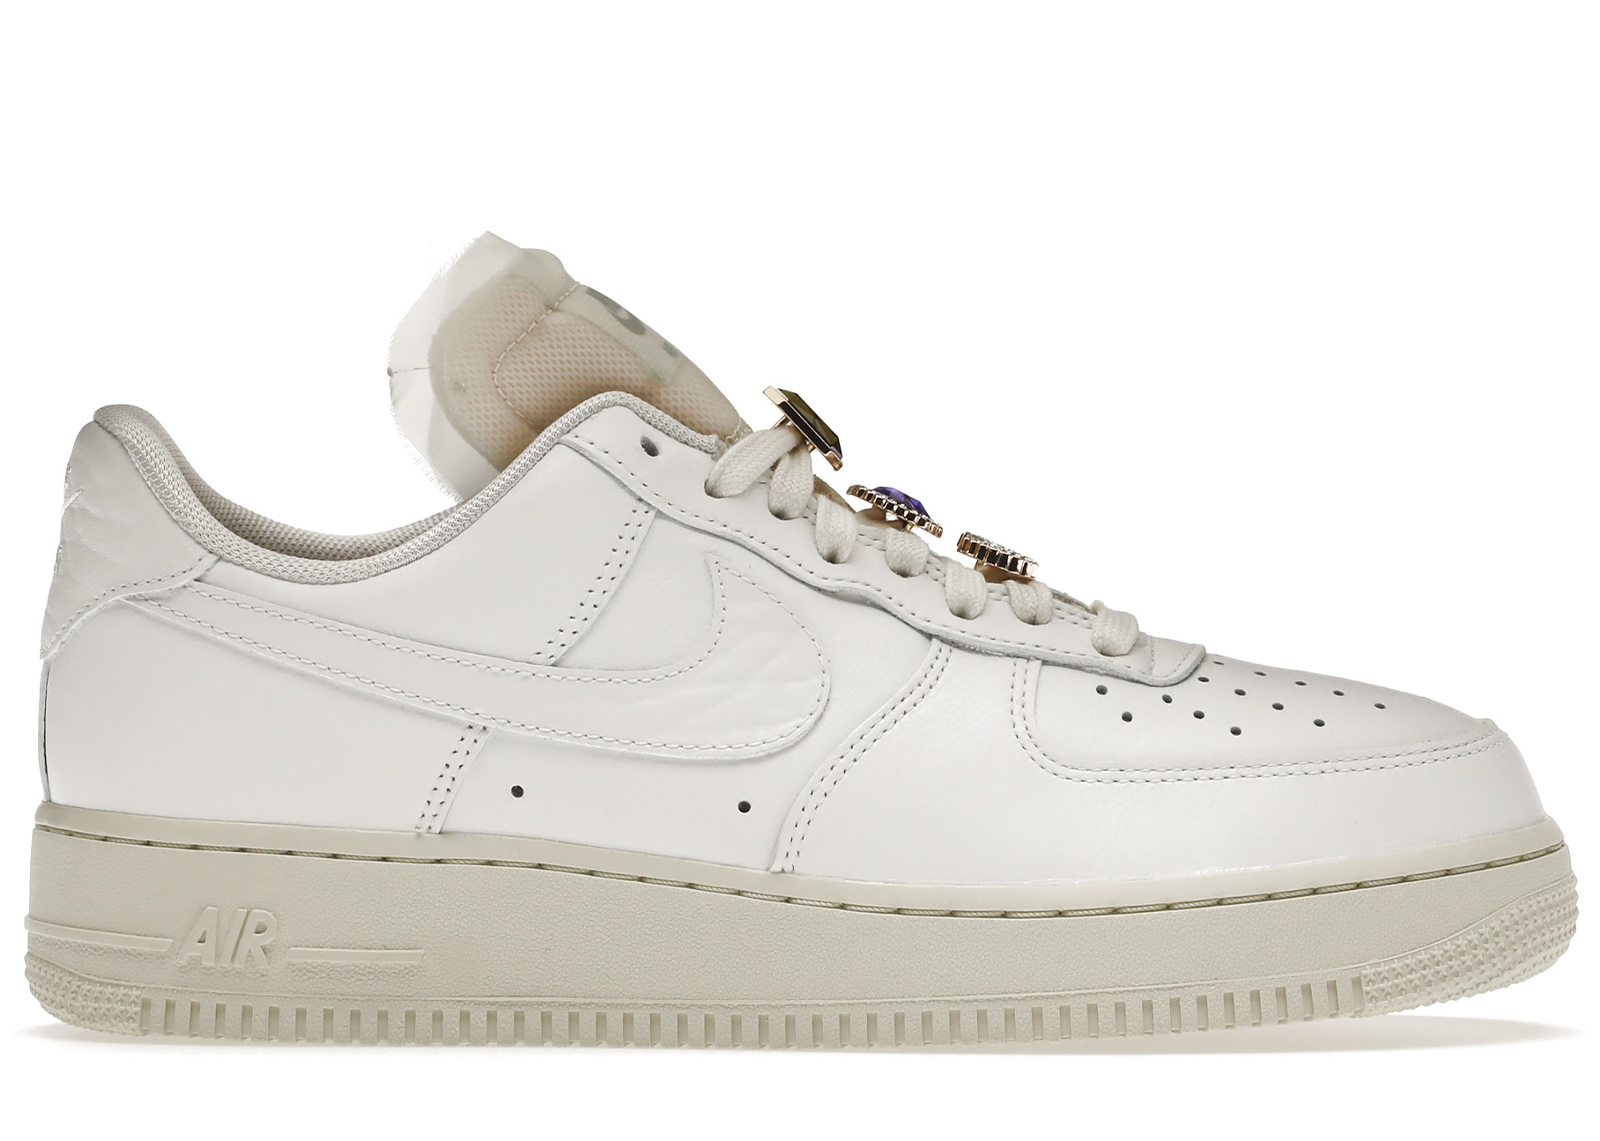 Nike Air Force 1 Low Prm Jewels White - DN5463-100 - US